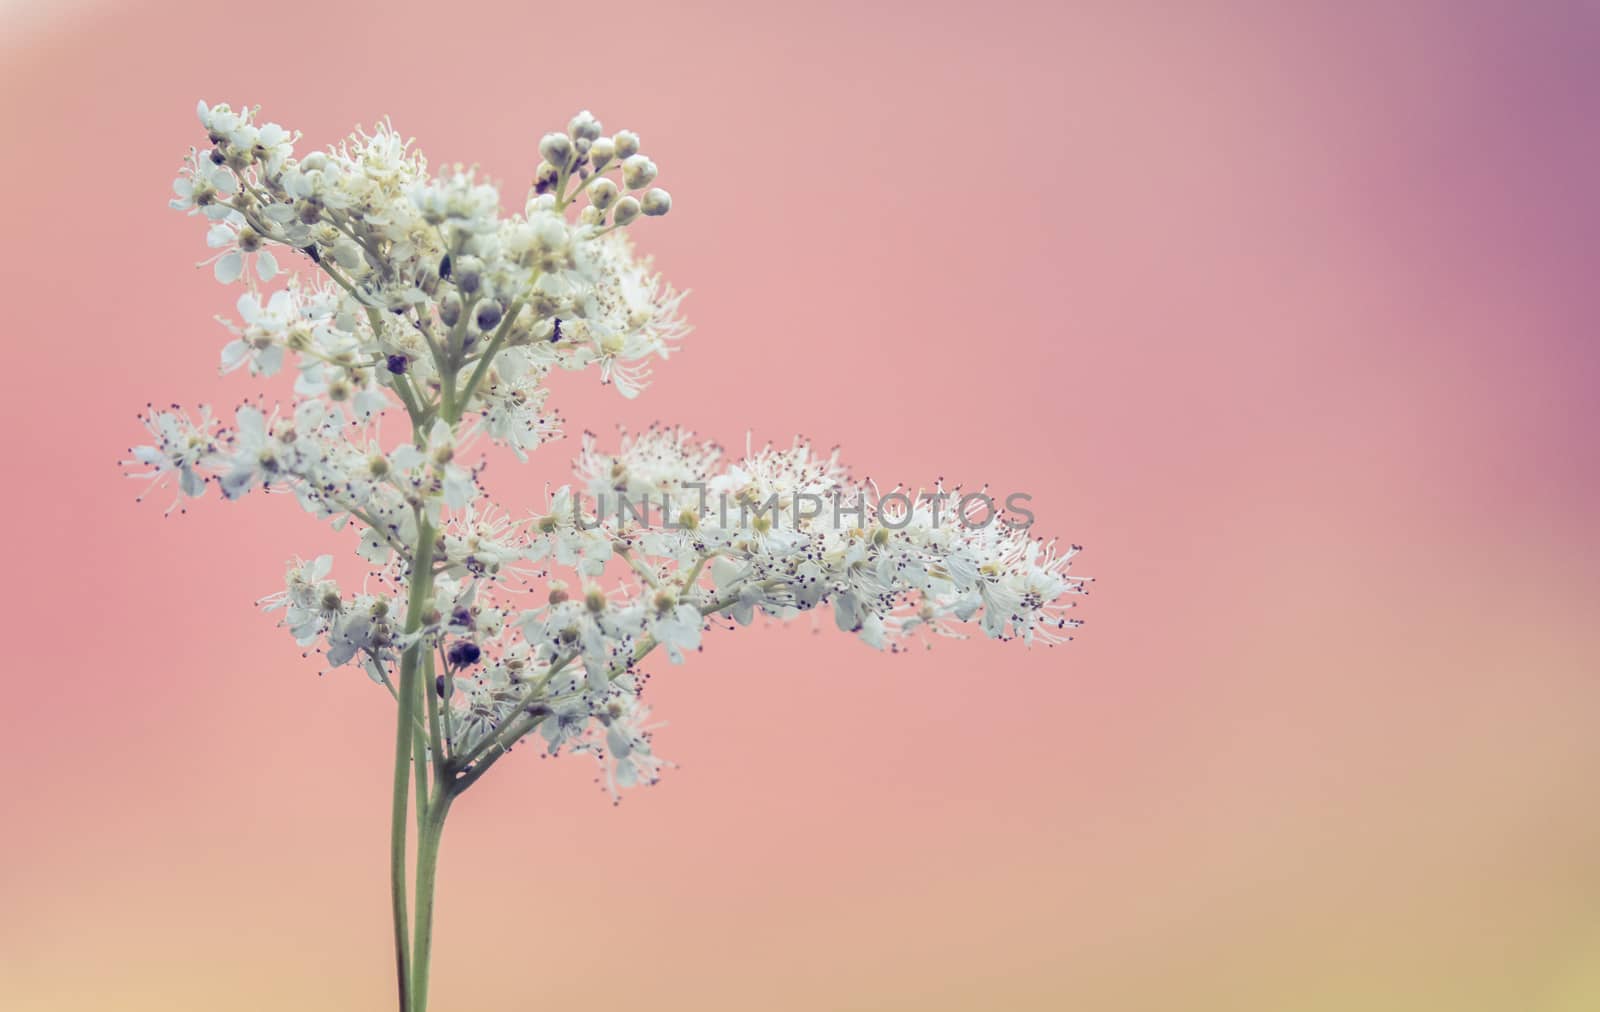 Delicate White Wildflowers Against A Pastel Pink Background With Copy Space